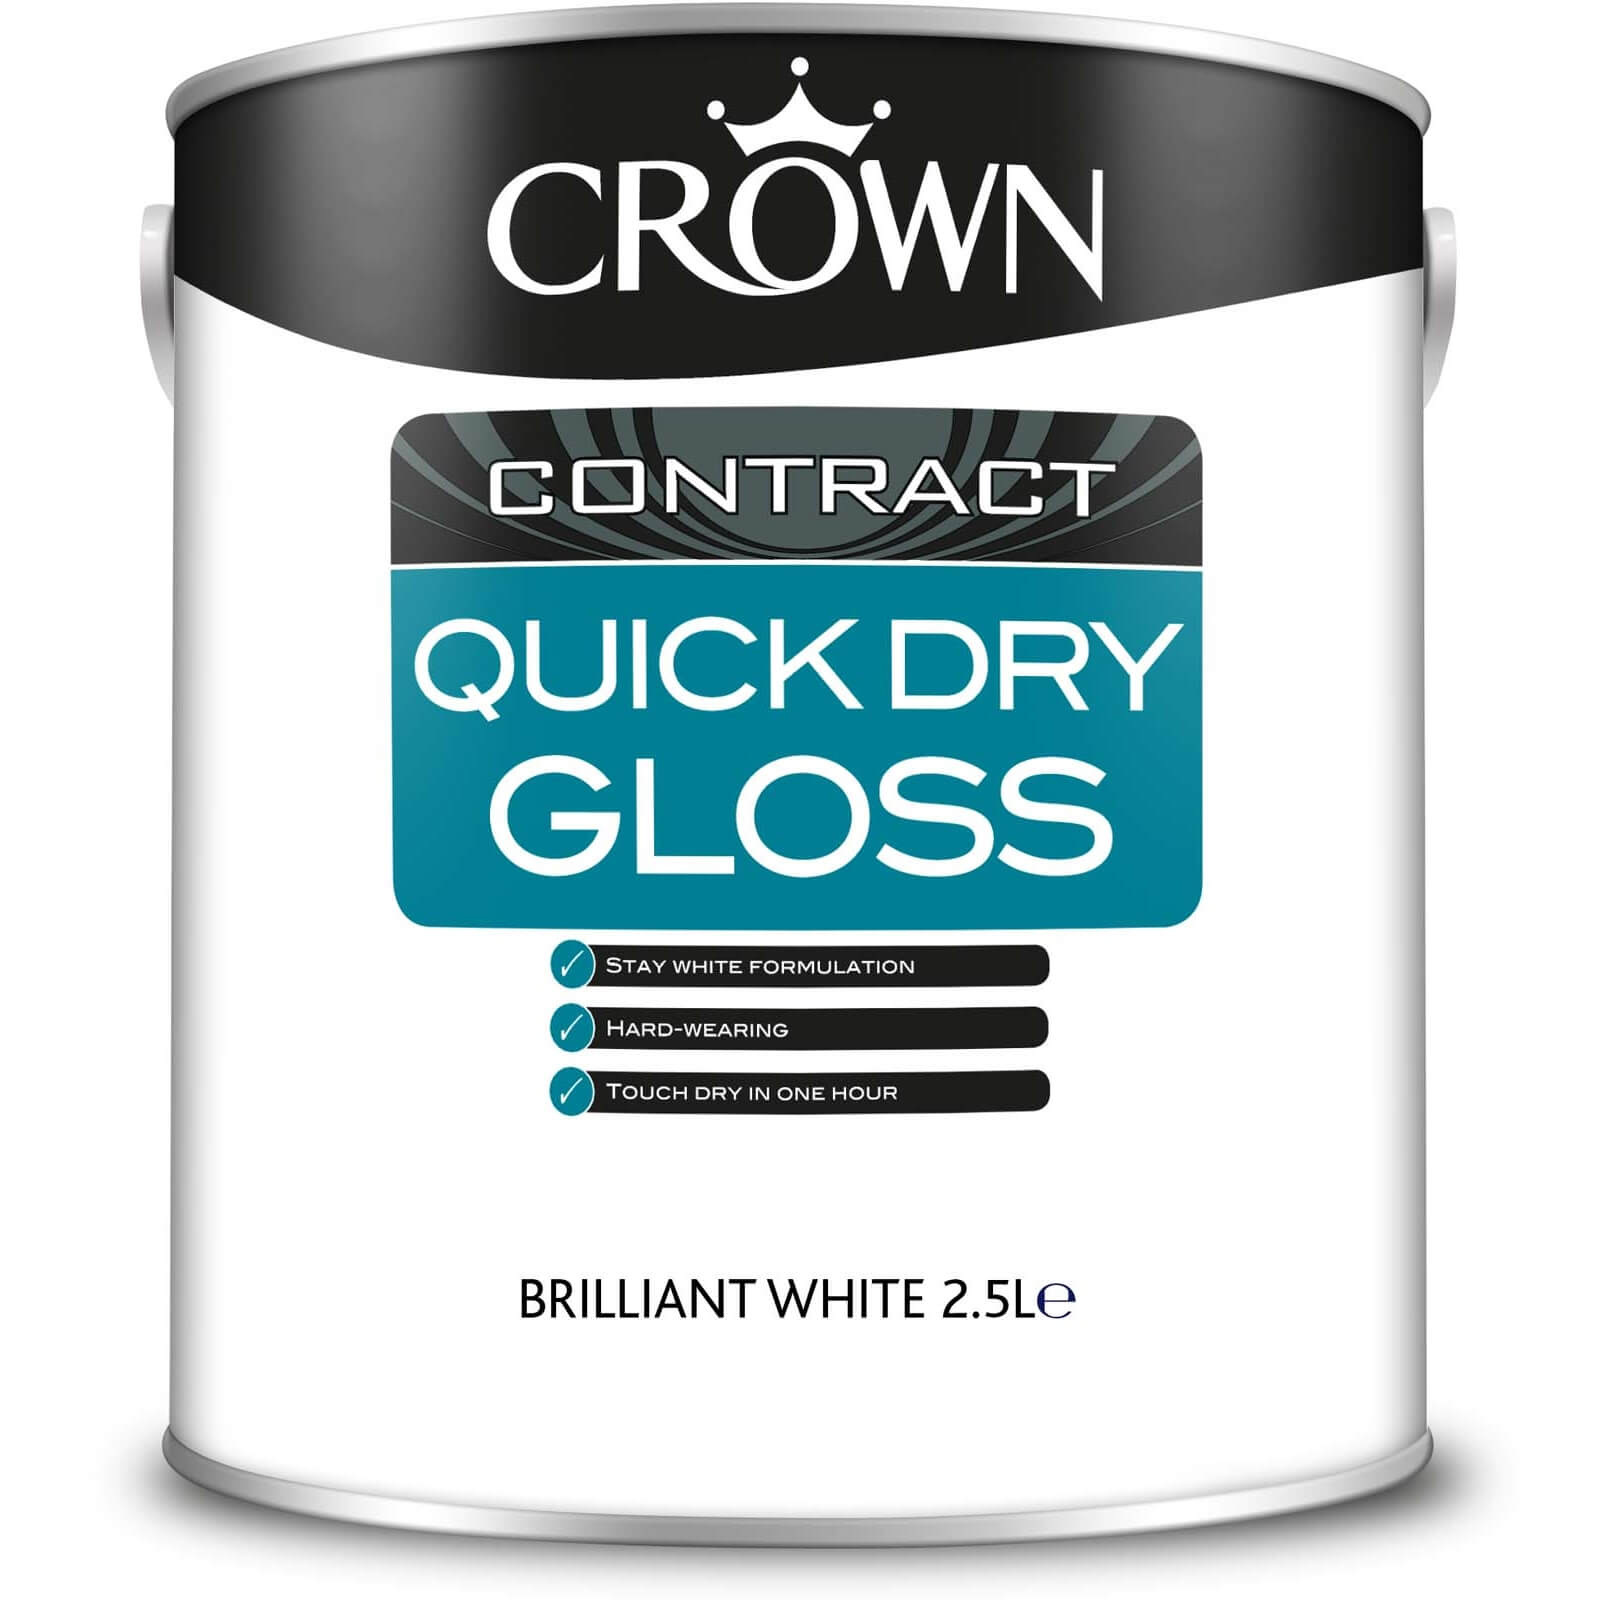 Crown Contract Quick Dry Gloss Brilliant White Paint - 2.5L